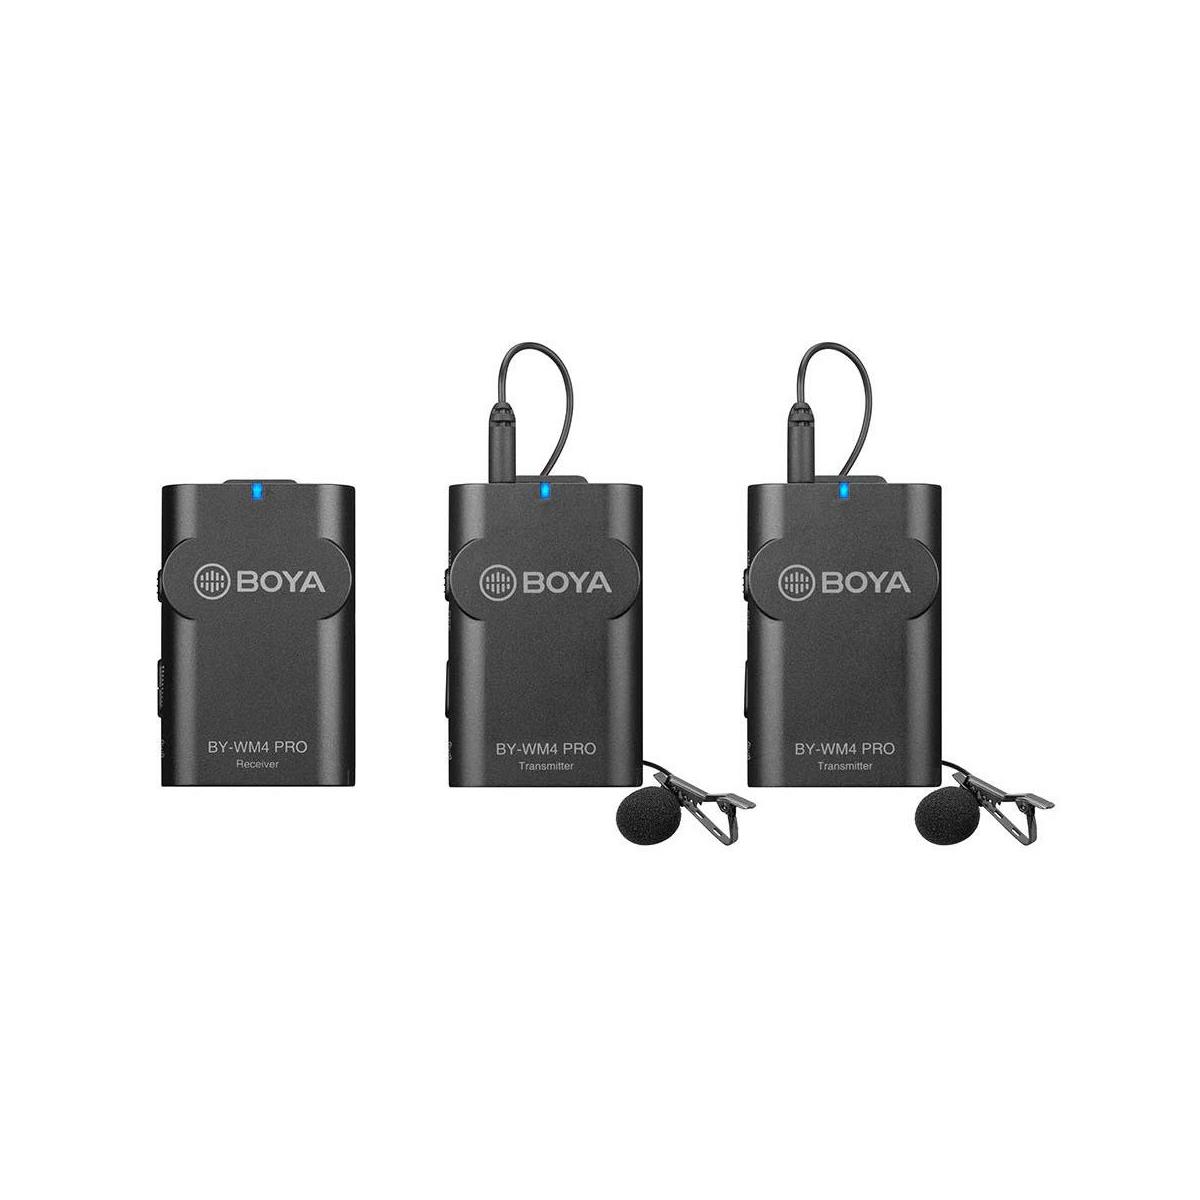 BOYA BY-WM4 PRO K2 Dual-Channel Digital  Wireless Microphone System for DSLRs and Smartphones, Includes 2x Transmitter, 1x Receiver & Lavalier Mic